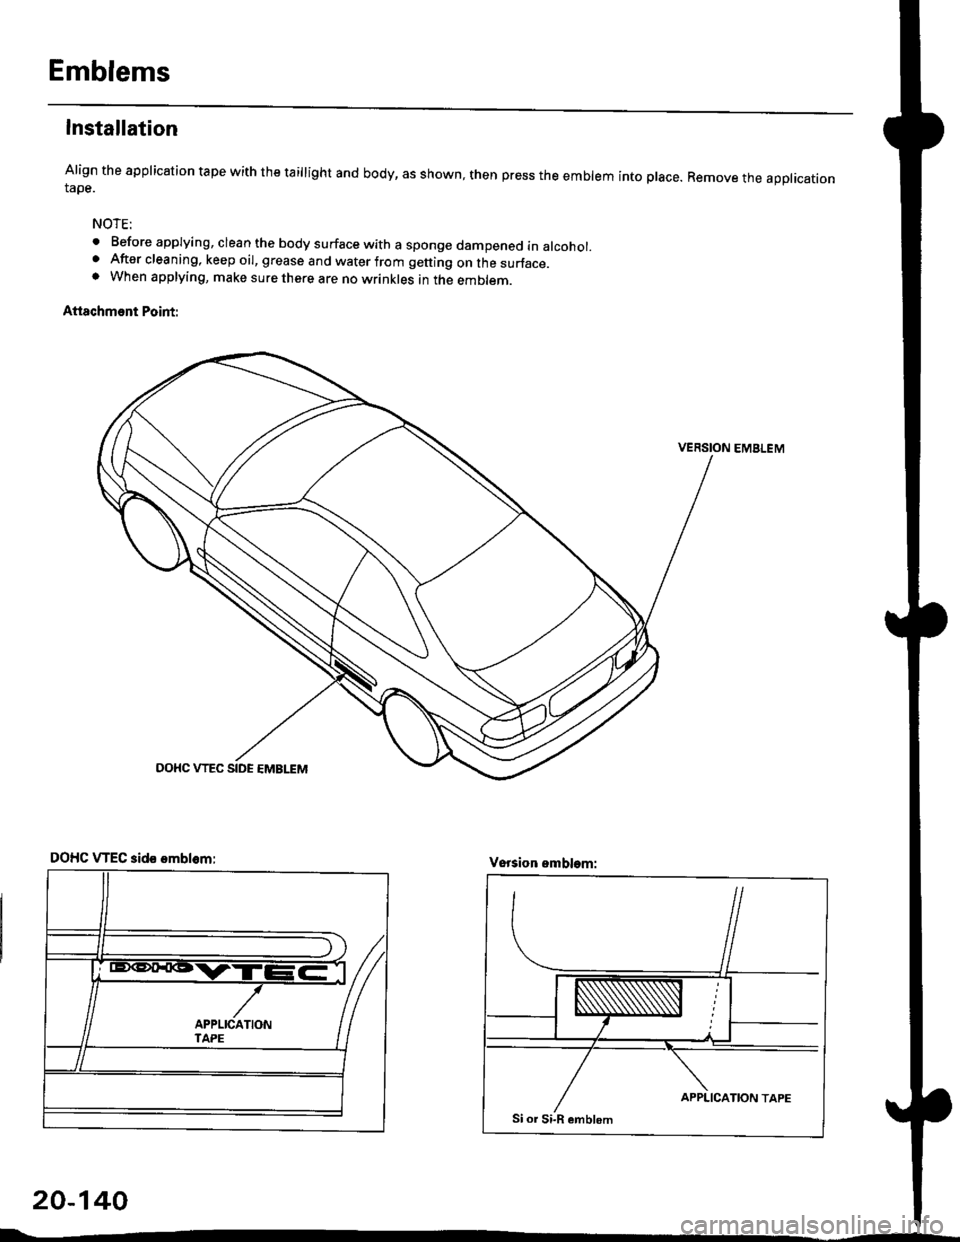 HONDA CIVIC 1998 6.G Service Manual Emblems
Installation
Align the application tape with the taillight and body, as shown, then press the emblem into place. Remove the appticationtape.
NOTE:
o Before applying, clean the body surface wit